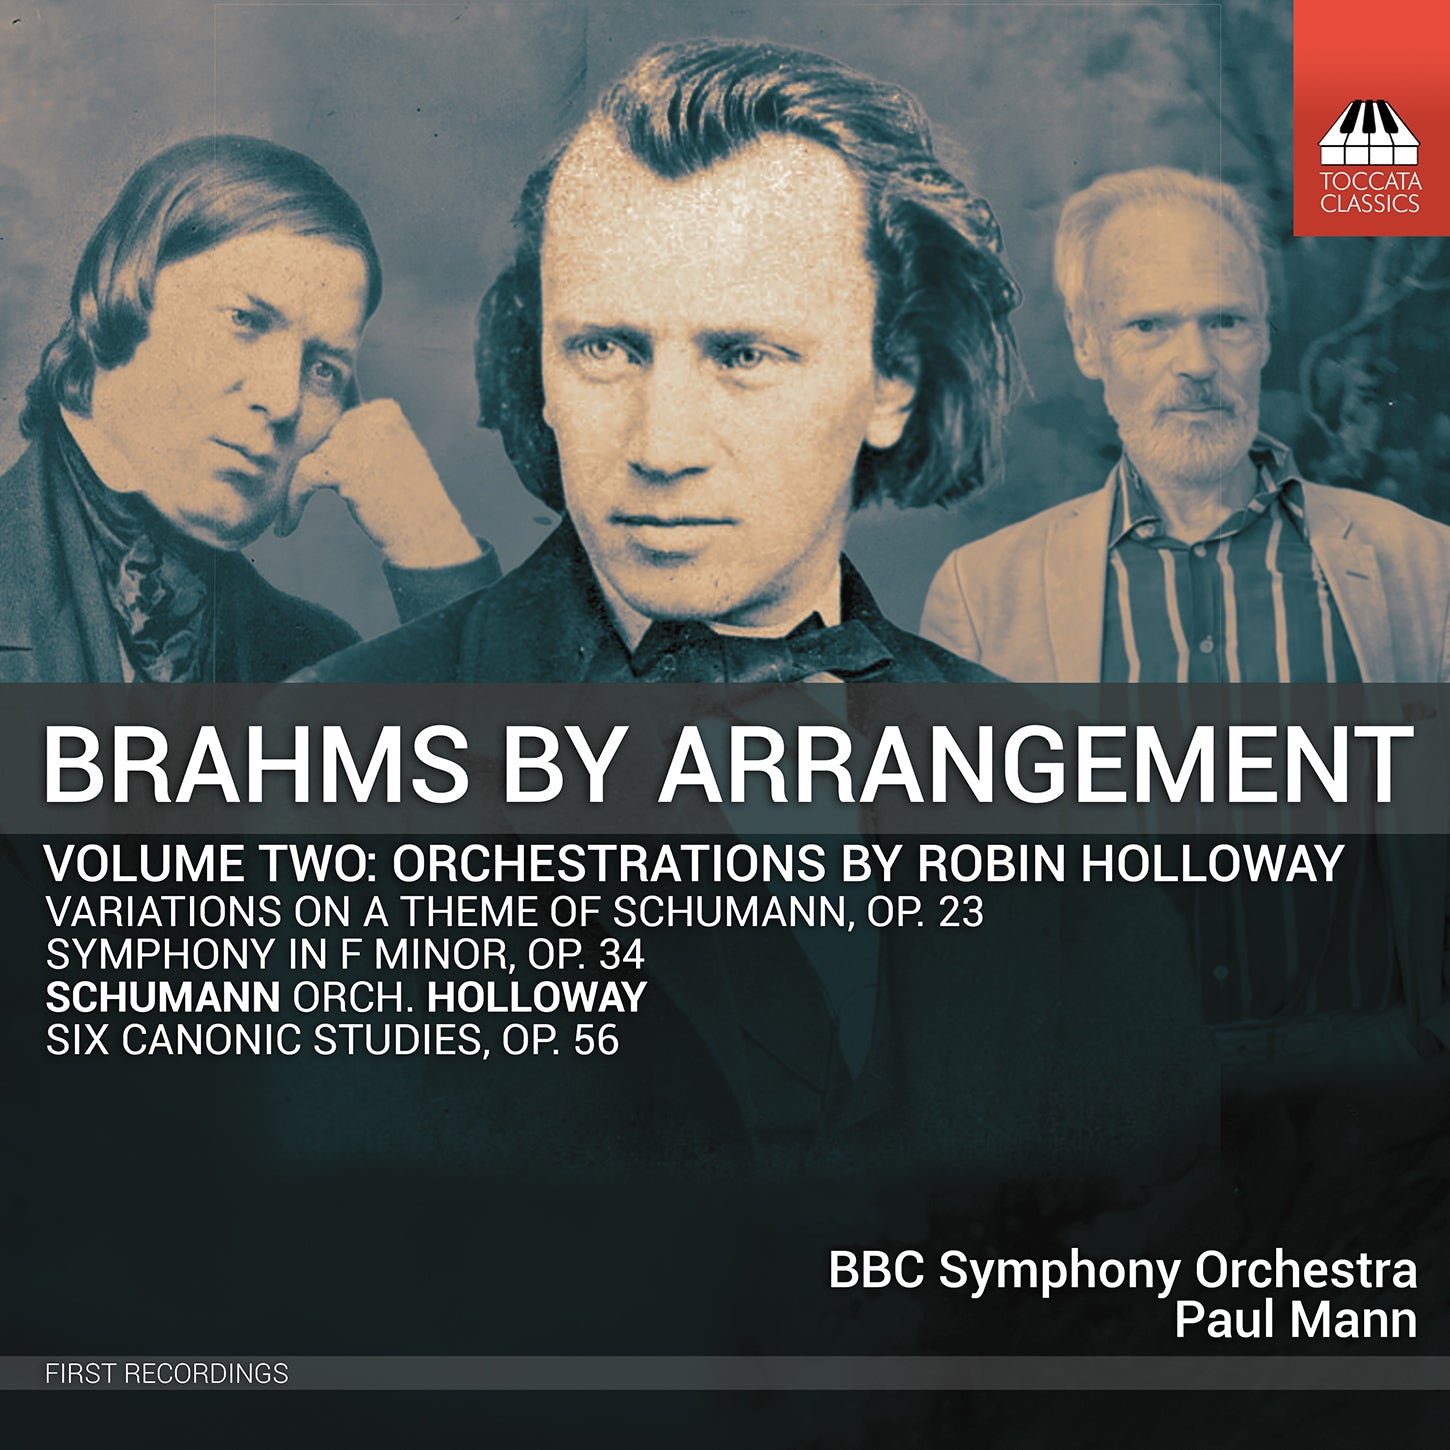 Brahms by Arrangement, Vol. 2 - Orchestrations by Robin Holloway